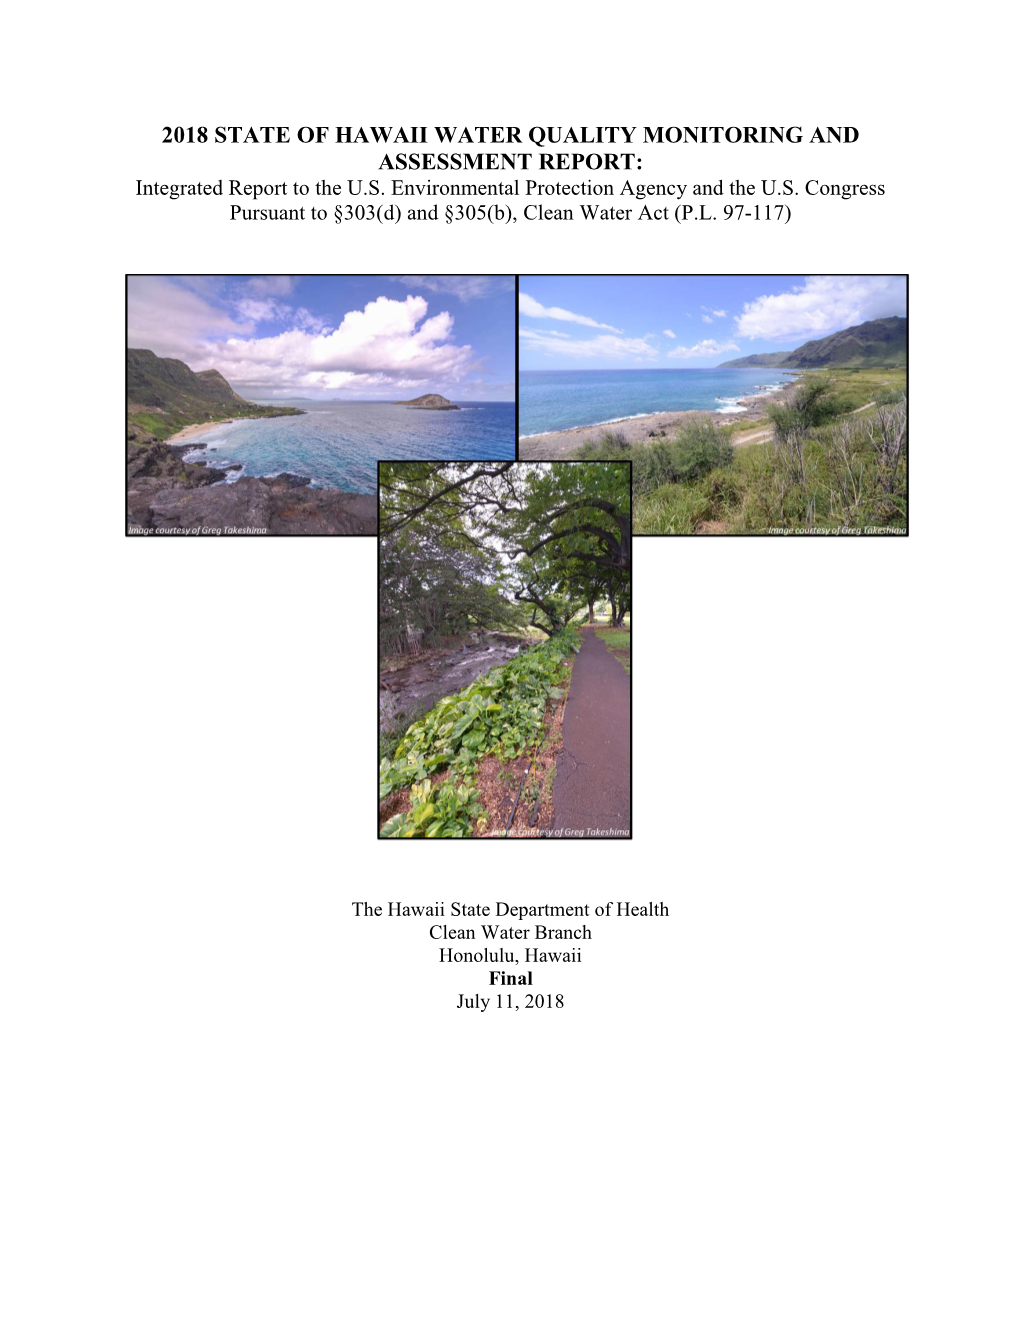 2018 STATE of HAWAII WATER QUALITY MONITORING and ASSESSMENT REPORT: Integrated Report to the U.S